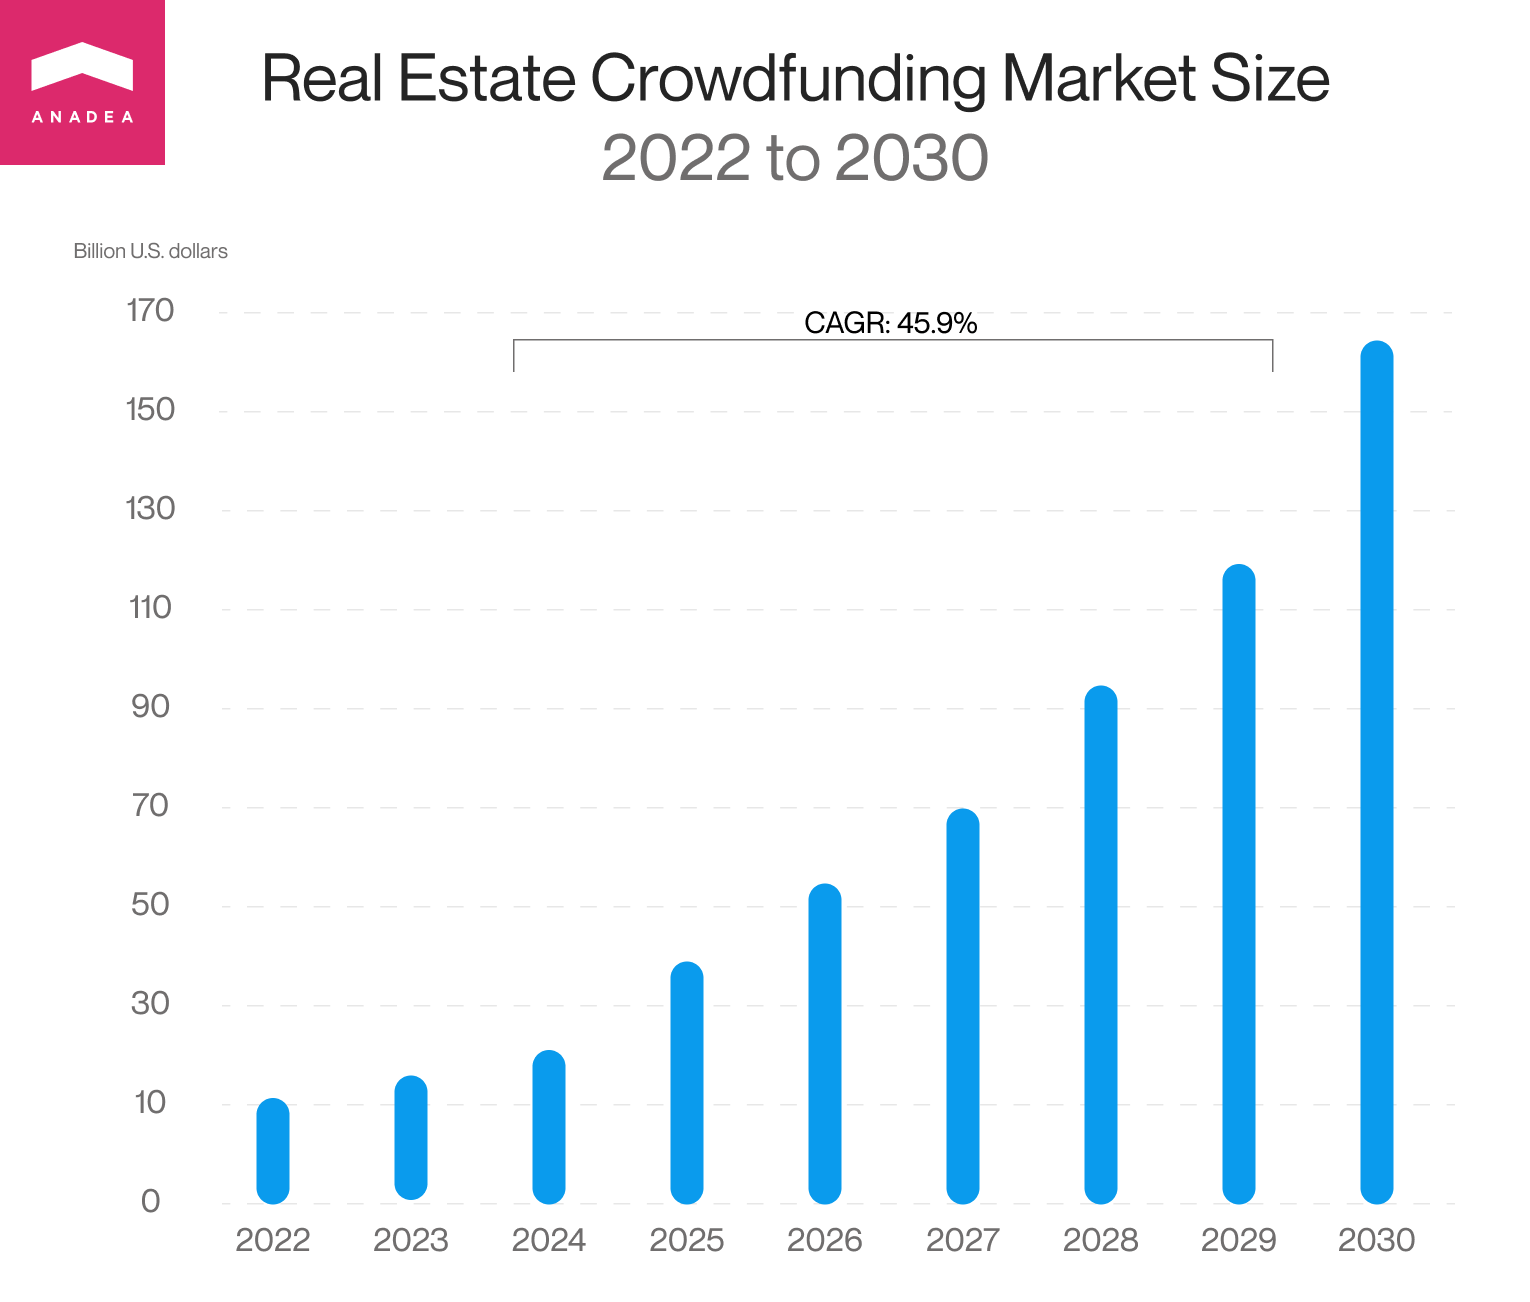 Real estate crowdfunding market size